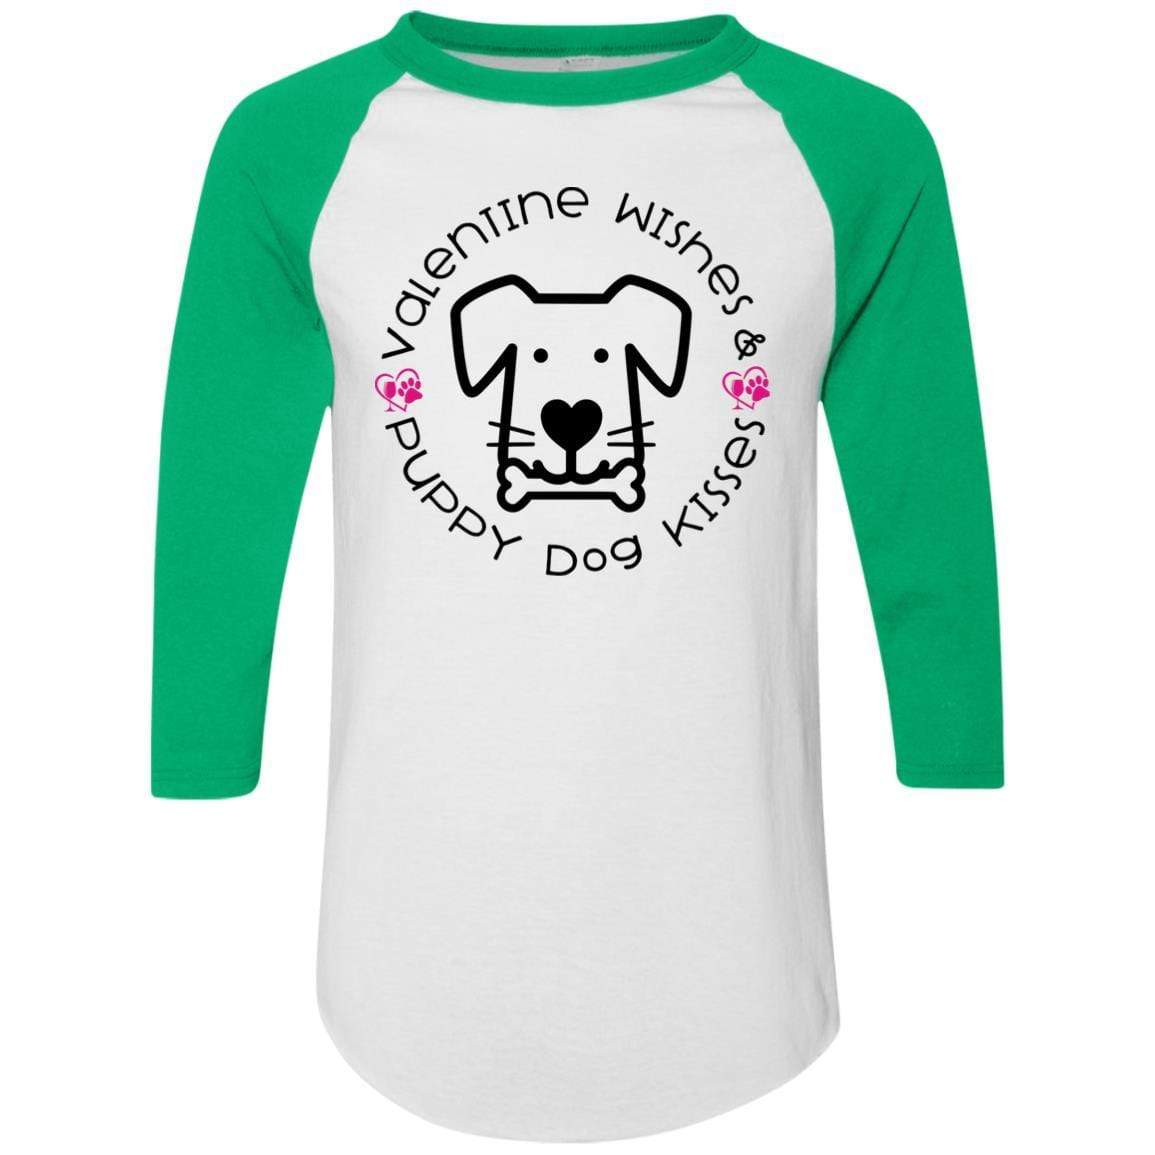 T-Shirts White/Kelly / S Winey Bitches Co 'Valentine Wishes and Puppy Dog Kisses" (Dog) Colorblock Raglan Jersey WineyBitchesCo